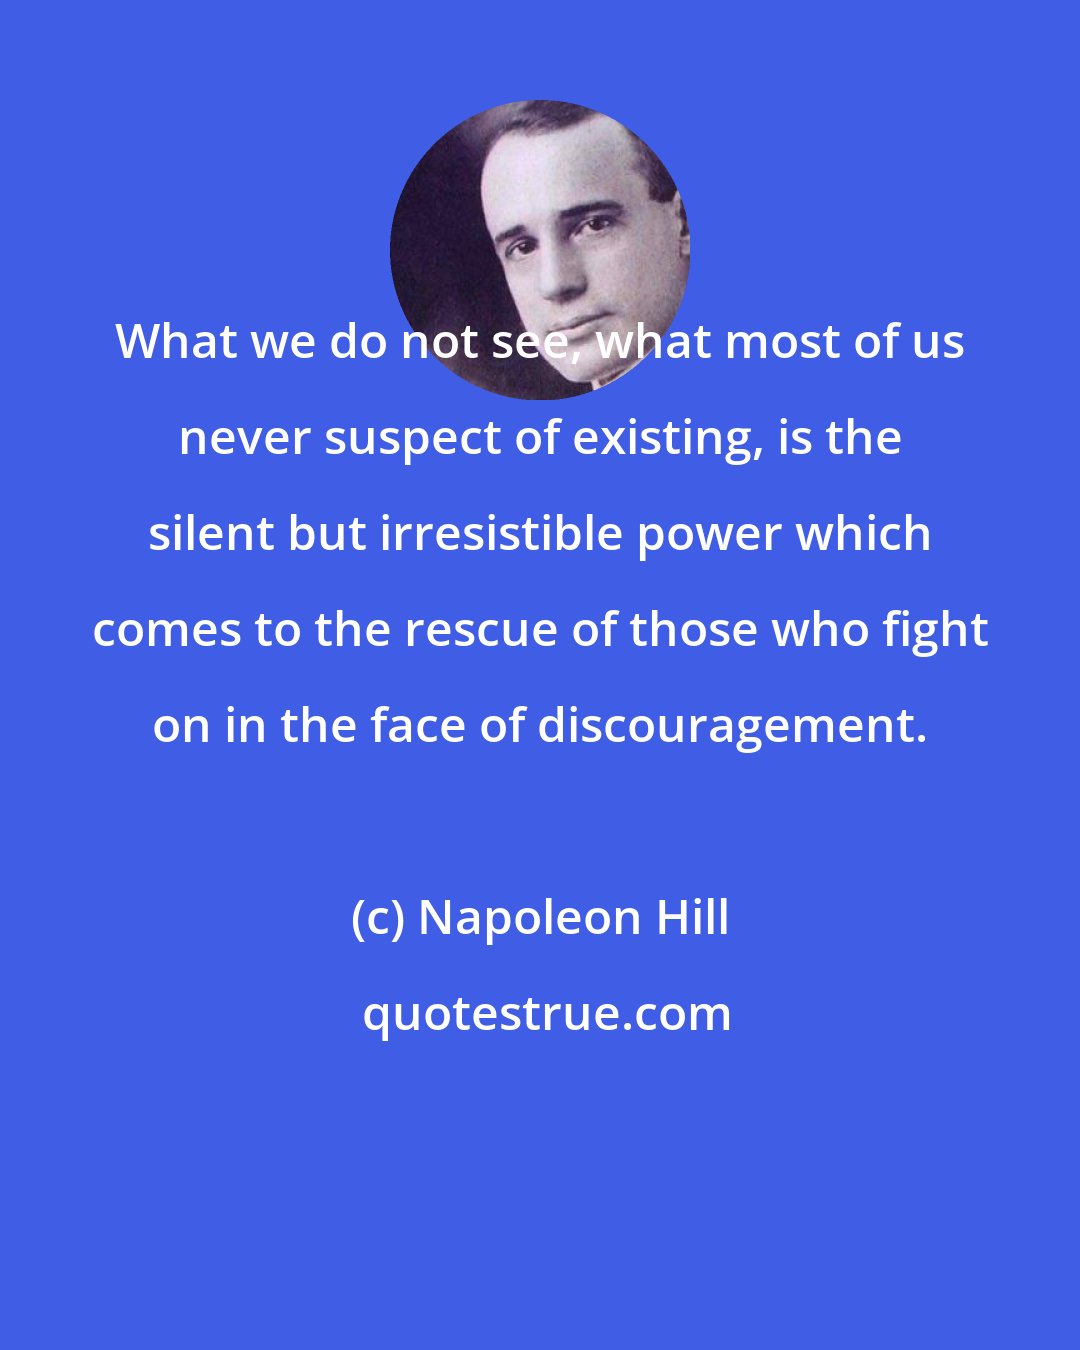 Napoleon Hill: What we do not see, what most of us never suspect of existing, is the silent but irresistible power which comes to the rescue of those who fight on in the face of discouragement.